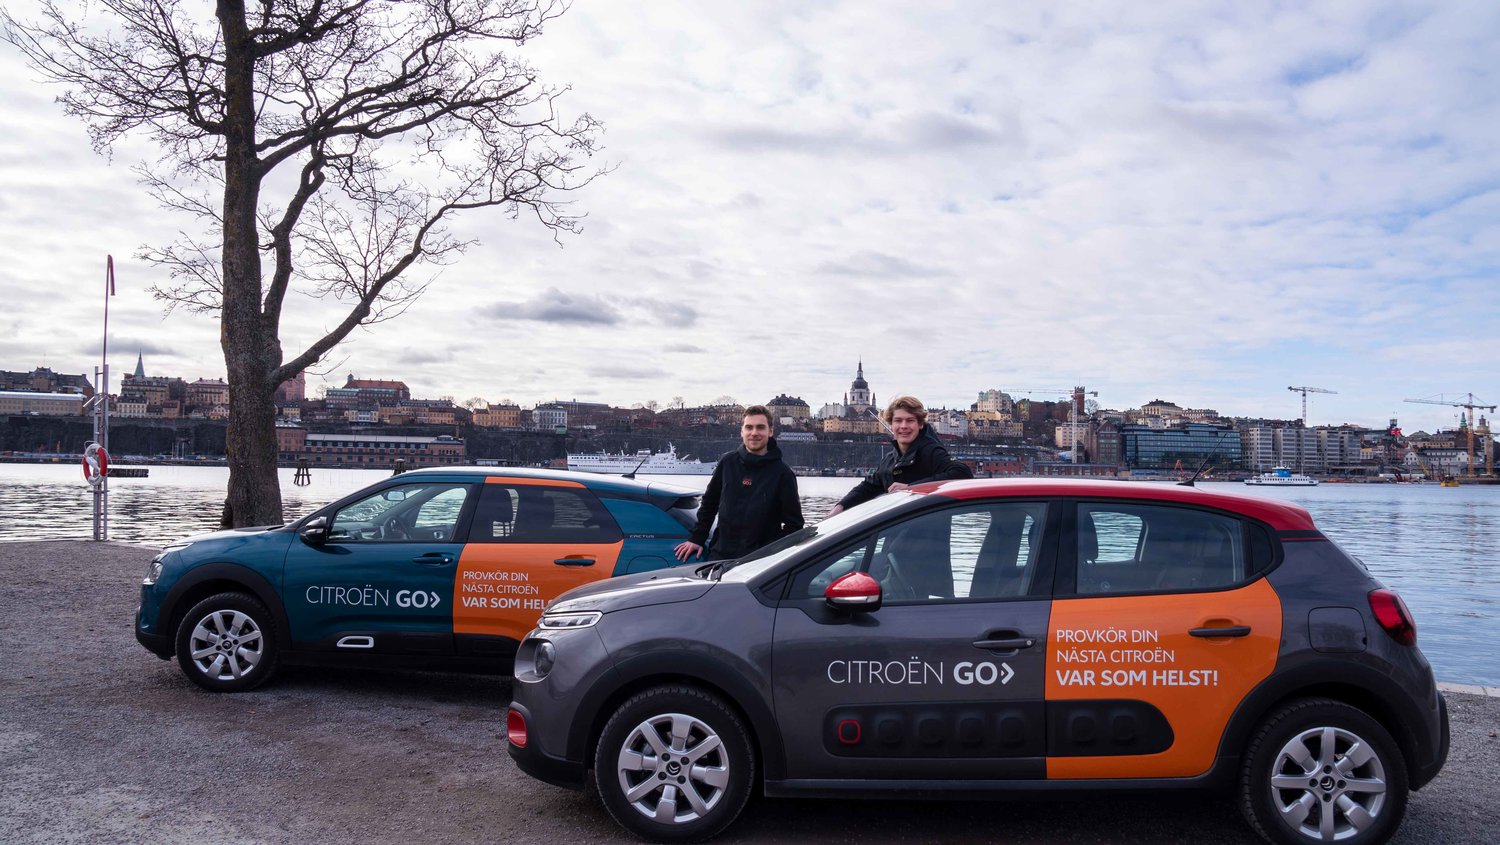 Citroën Go sold cars direct-to-consumer